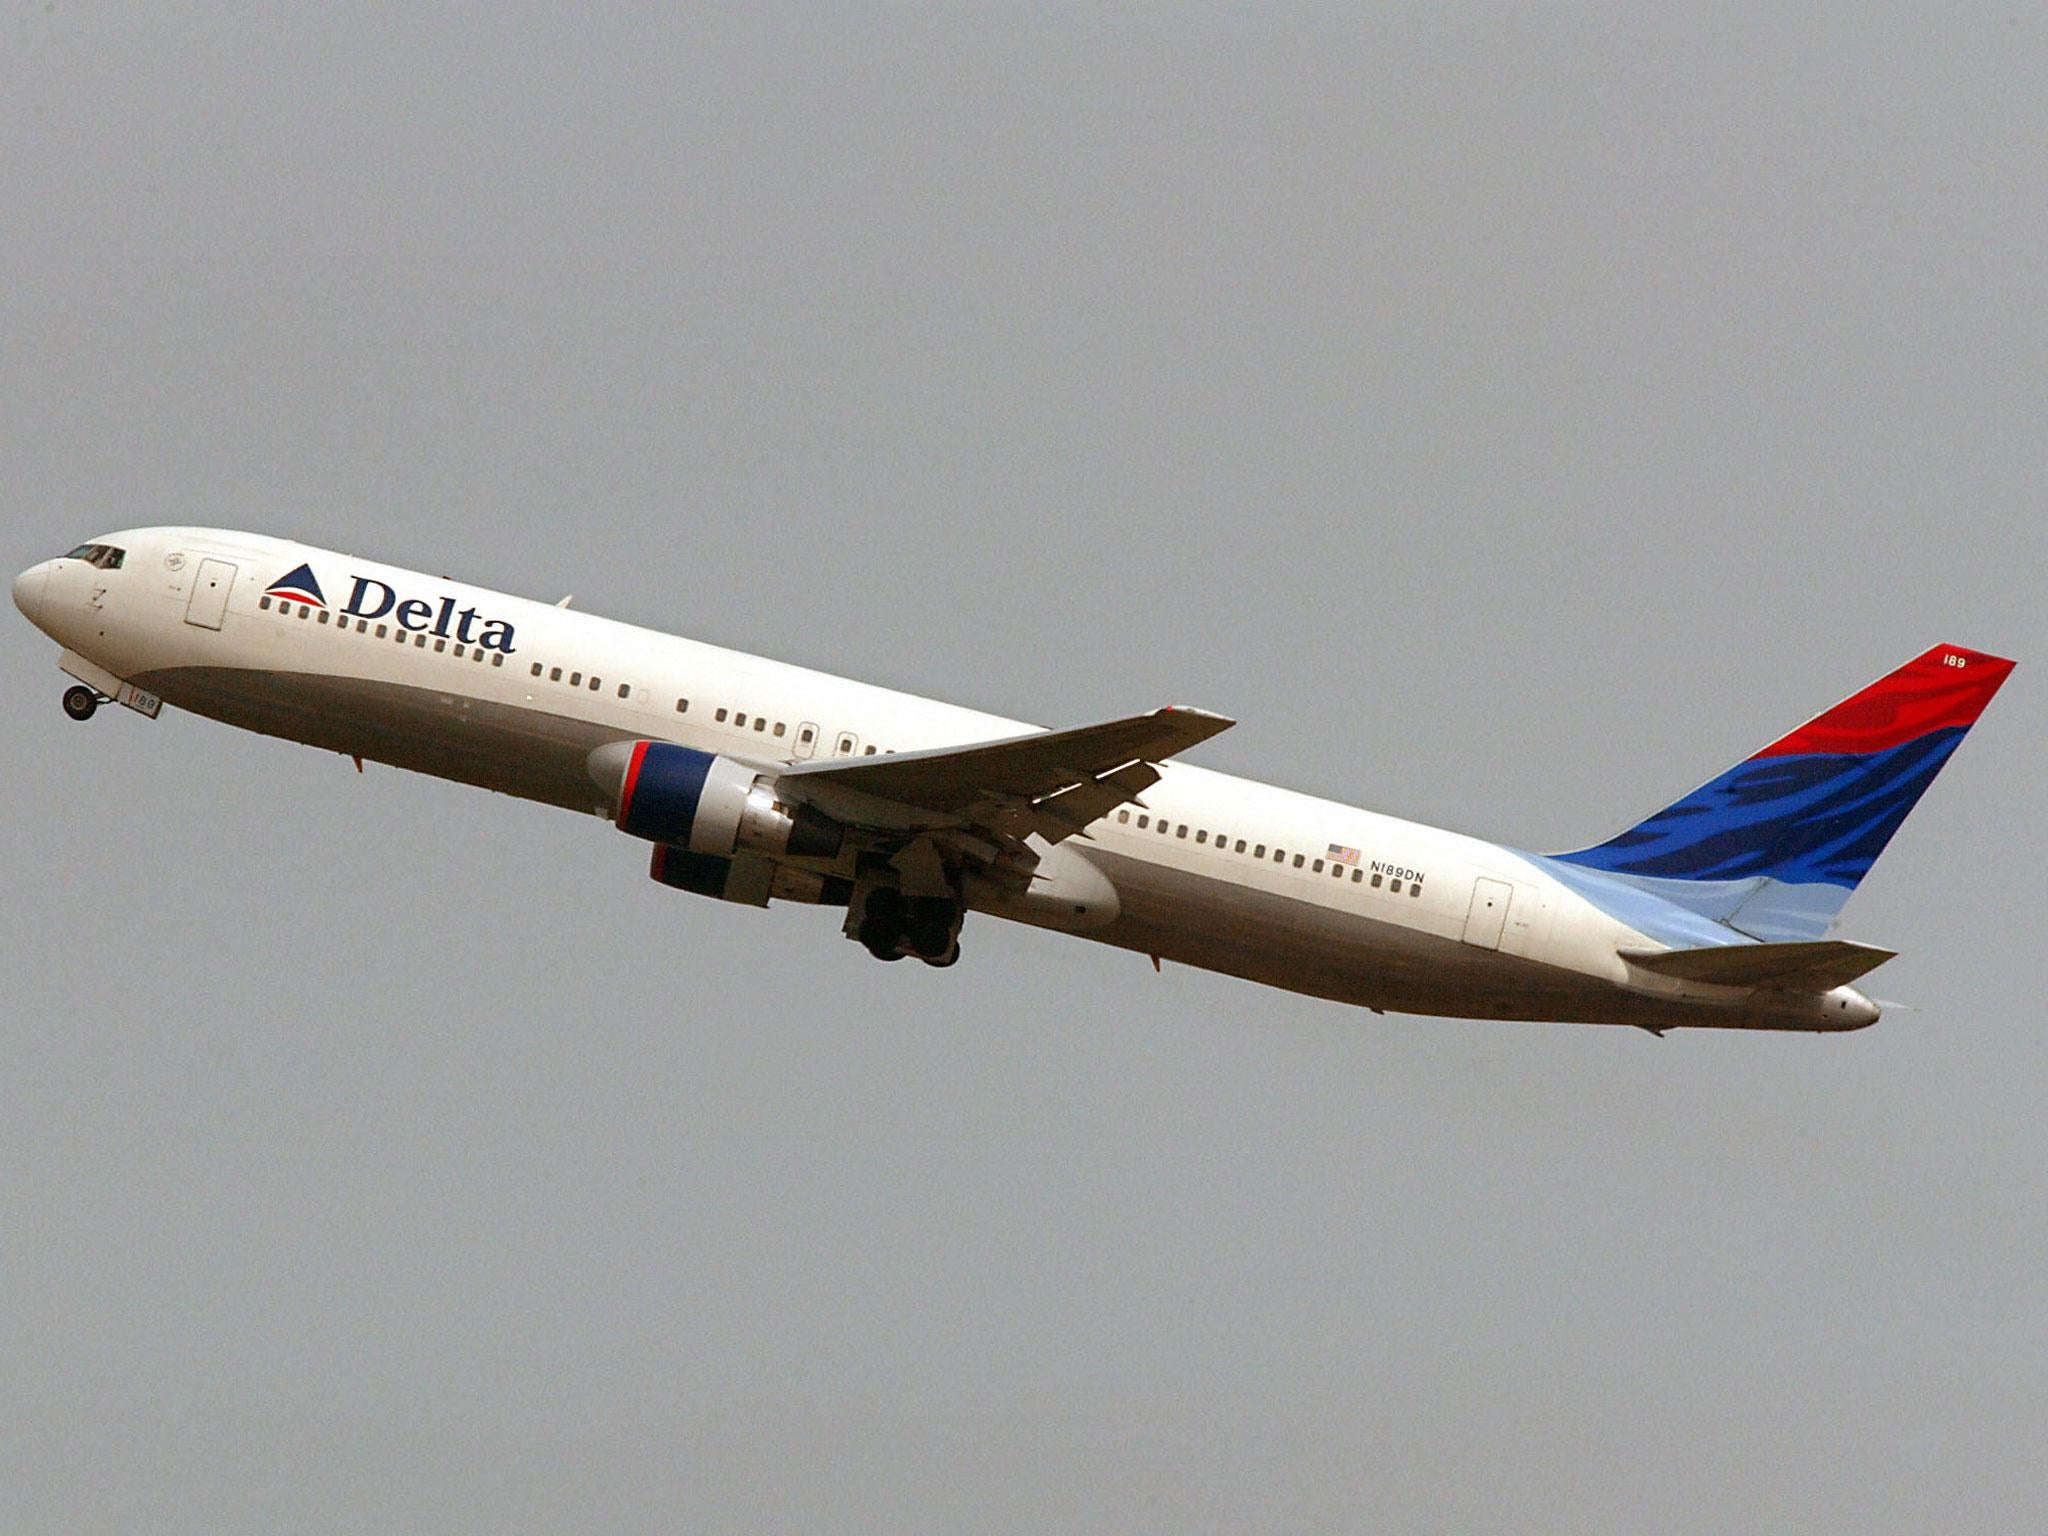 A Delta Boeing 767 commonly deployed on its European routes